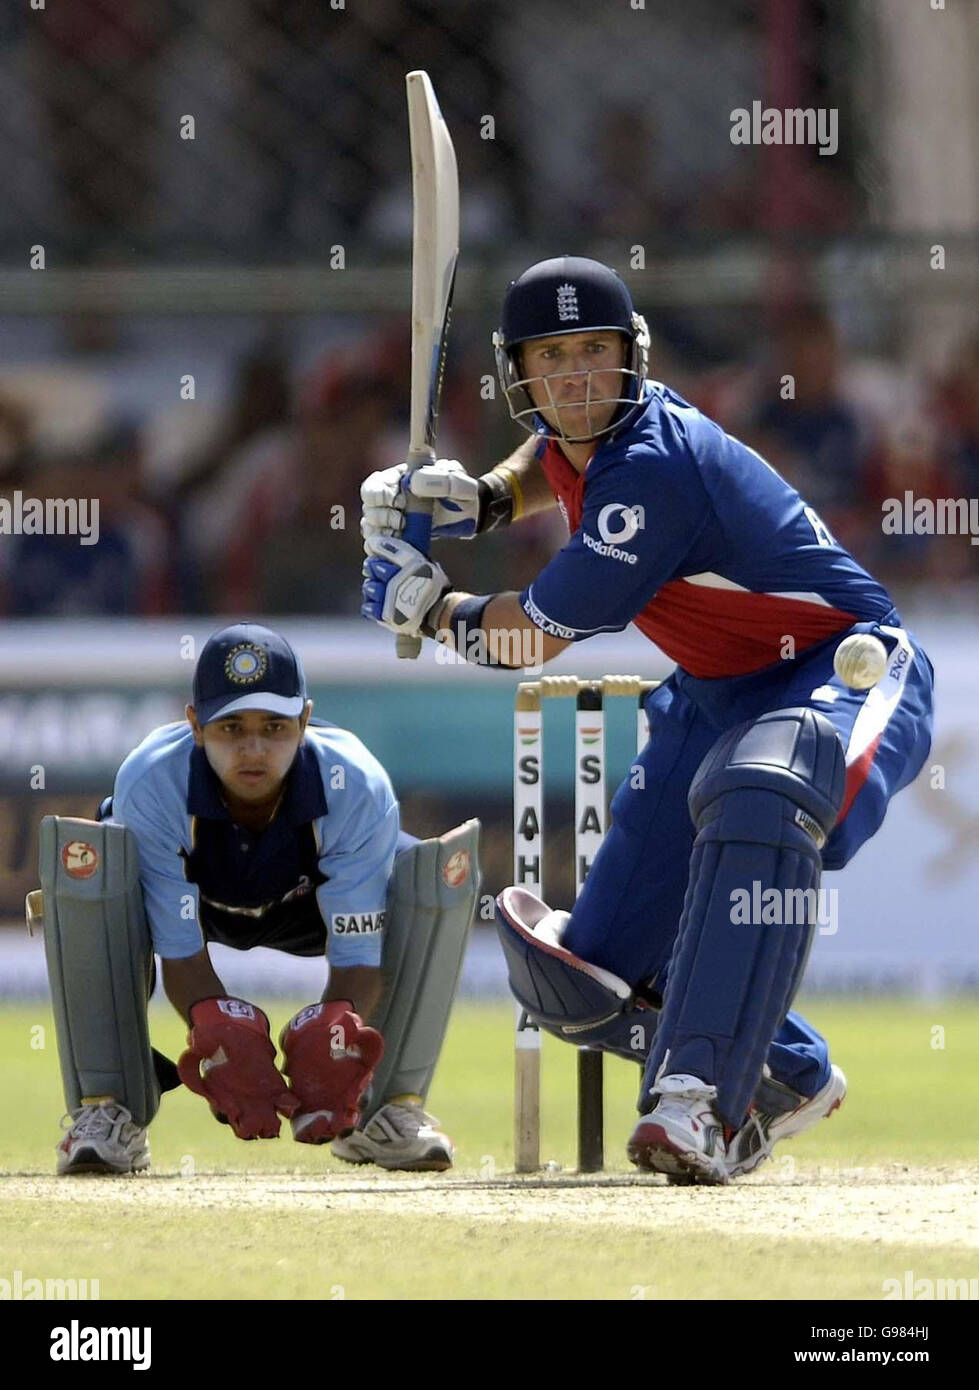 England batsman Matthew Prior in action during the one-day tour match against RCA President's XI at the Sawai Mansingh Stadium in Jaipur, India, Saturday March 25, 2006. PRESS ASSOCIATION Photo. Photo credit should read: Rebecca Naden/PA. Stock Photo